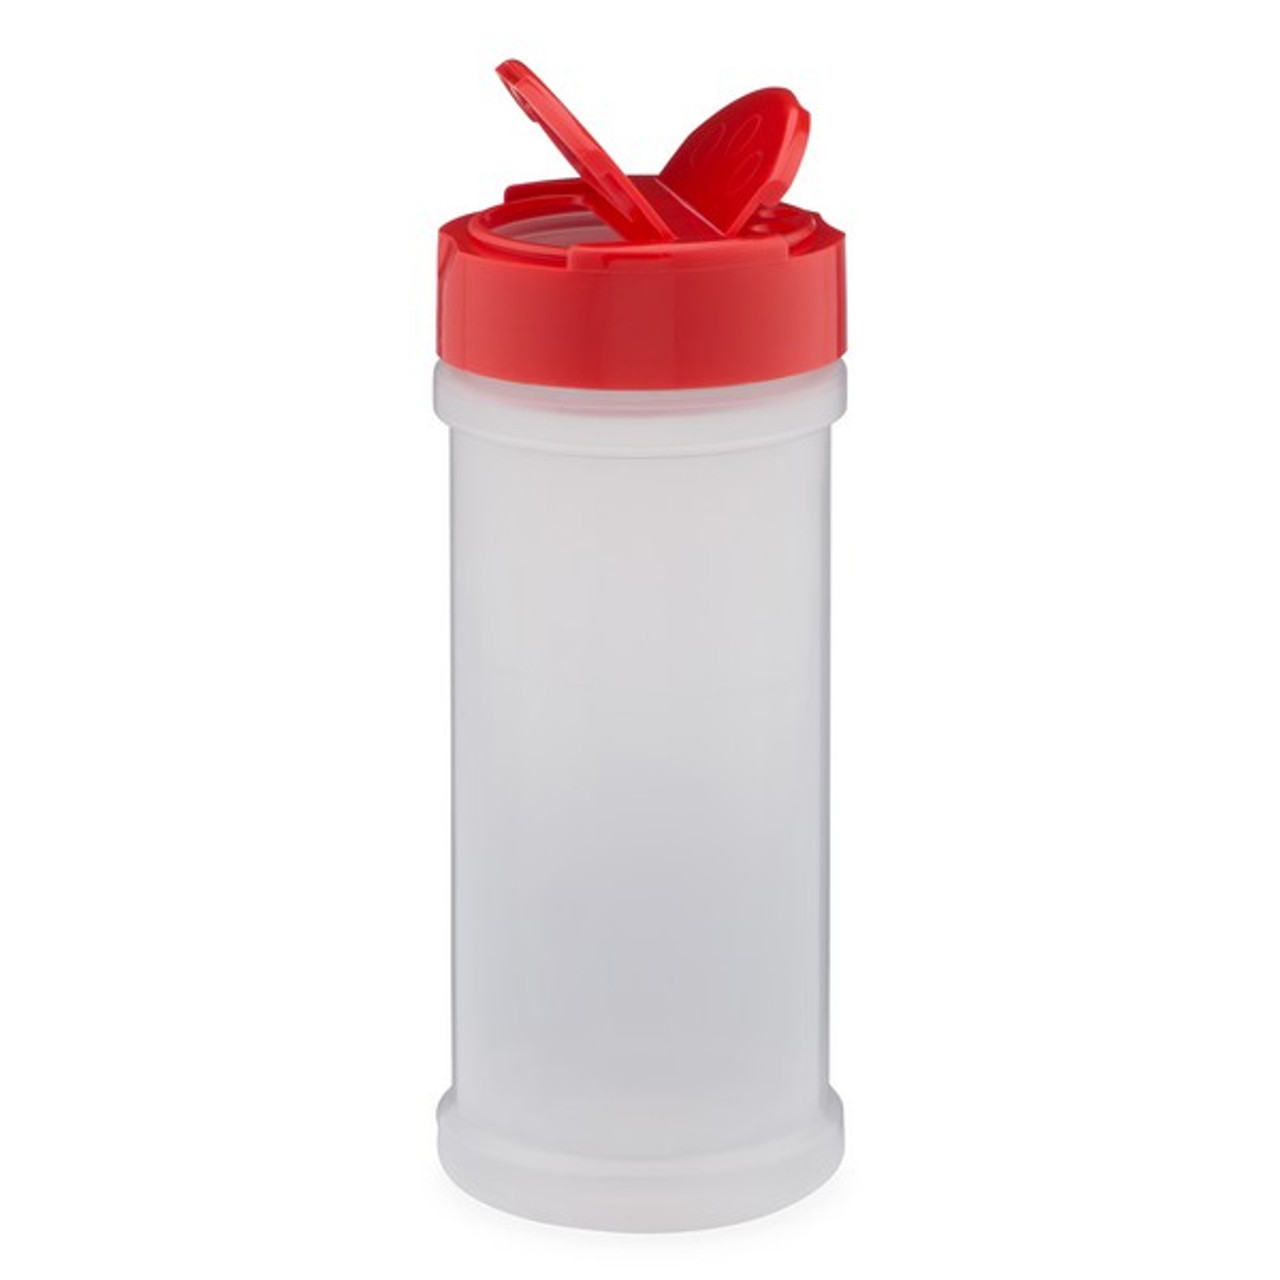 8 oz spice container